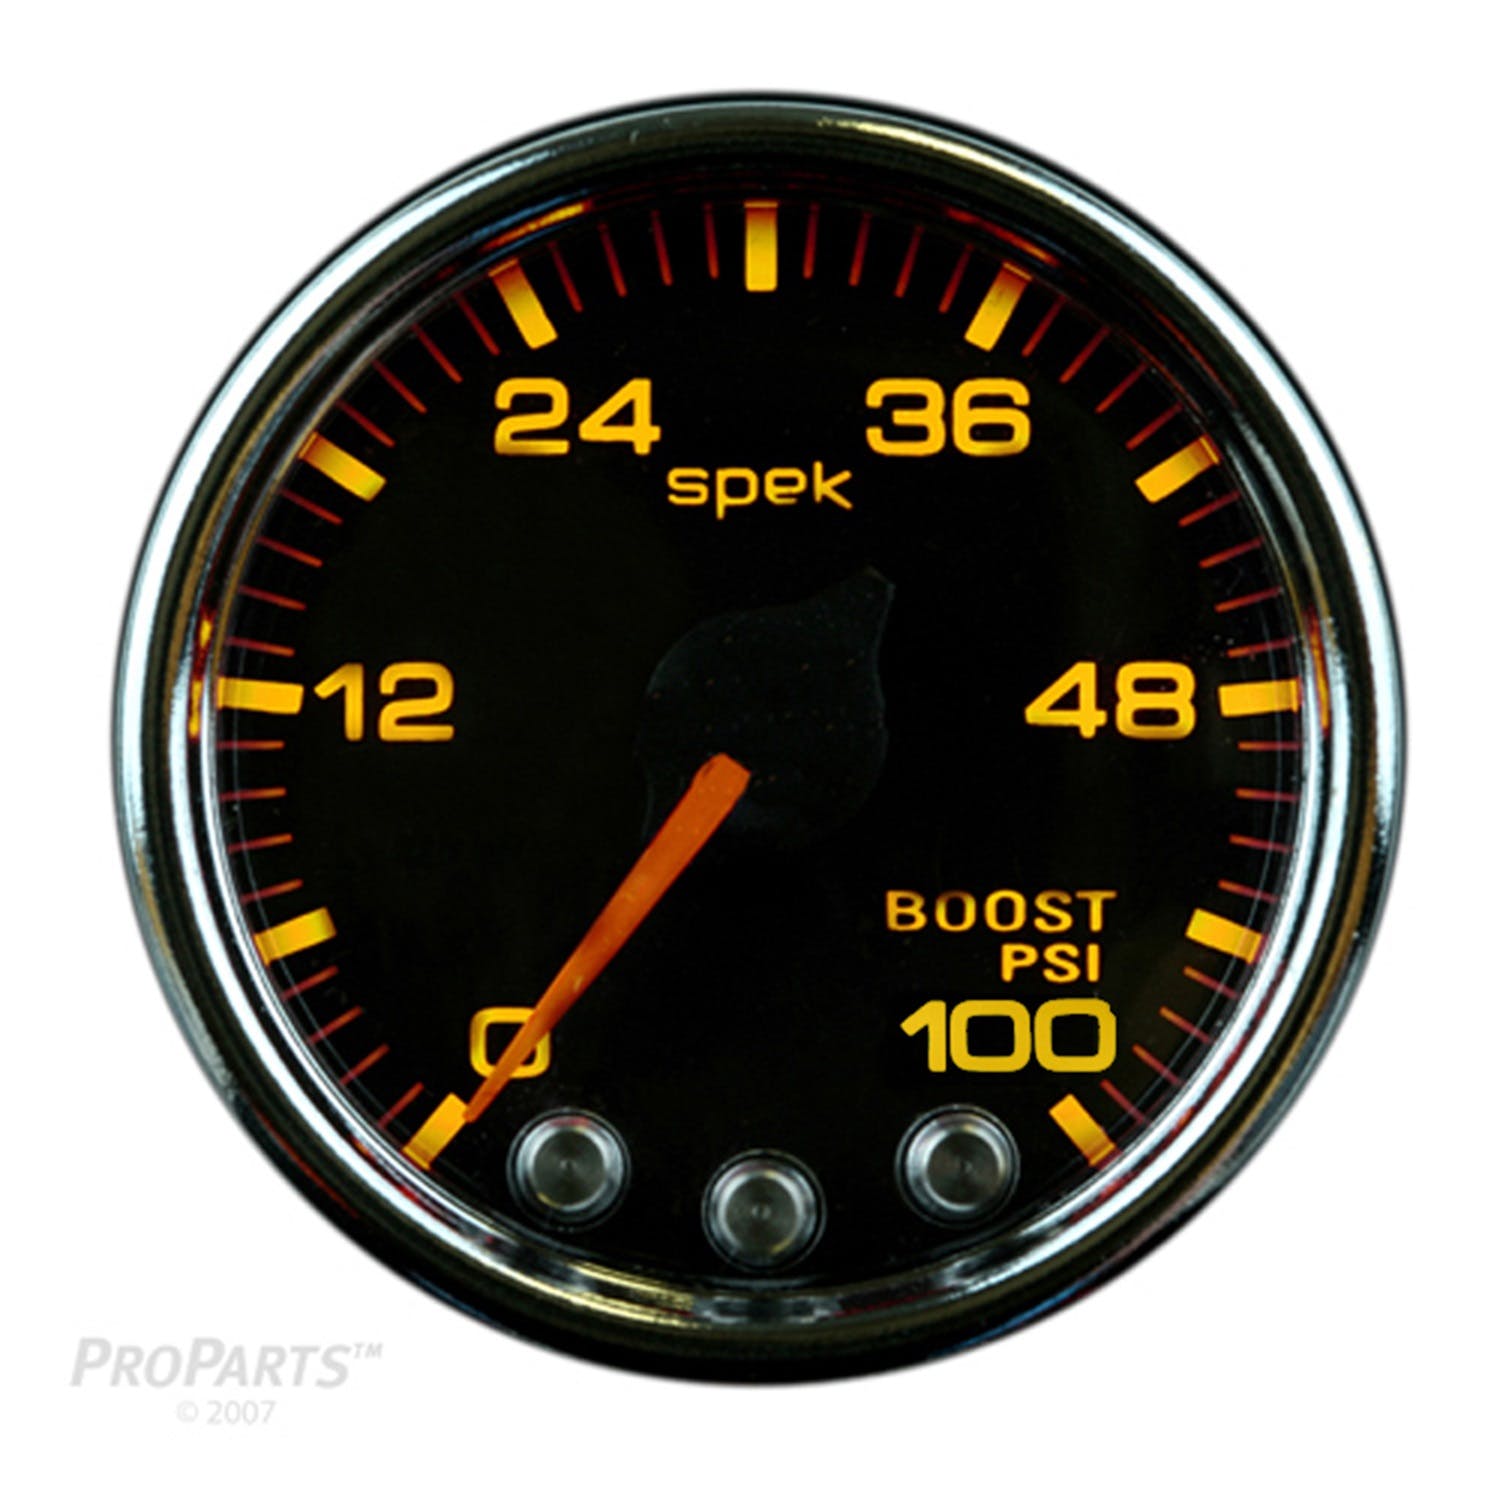 AutoMeter Products P30531 Boost Gauge, 2 1/16, 100PSI, Stepper Motor Black/Chrome